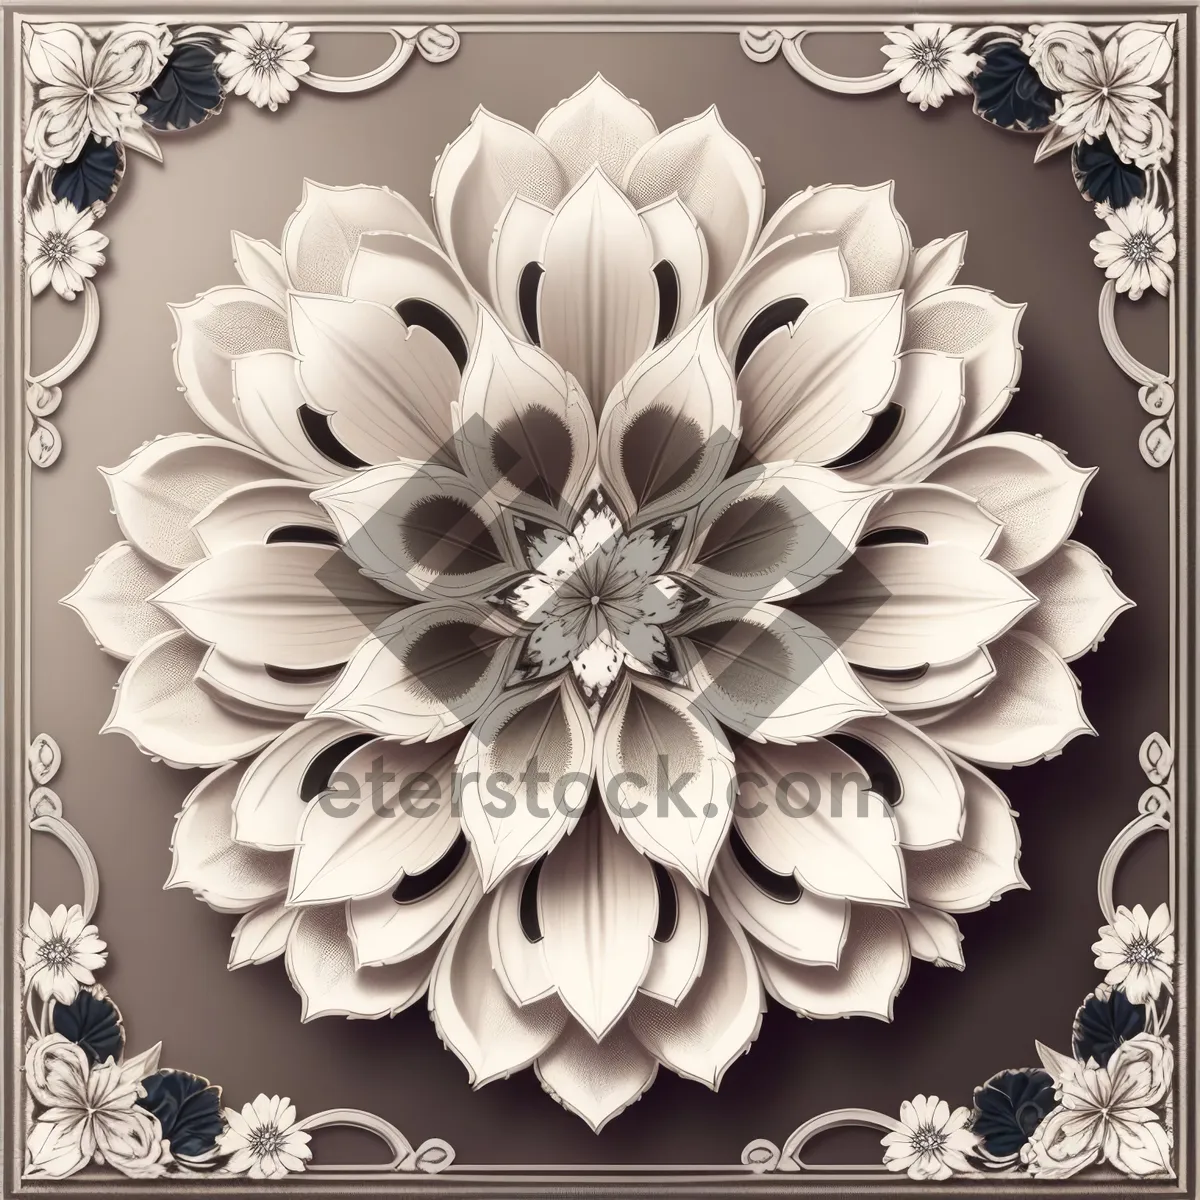 Picture of Floral Retro Damask Seamless Wallpaper Design